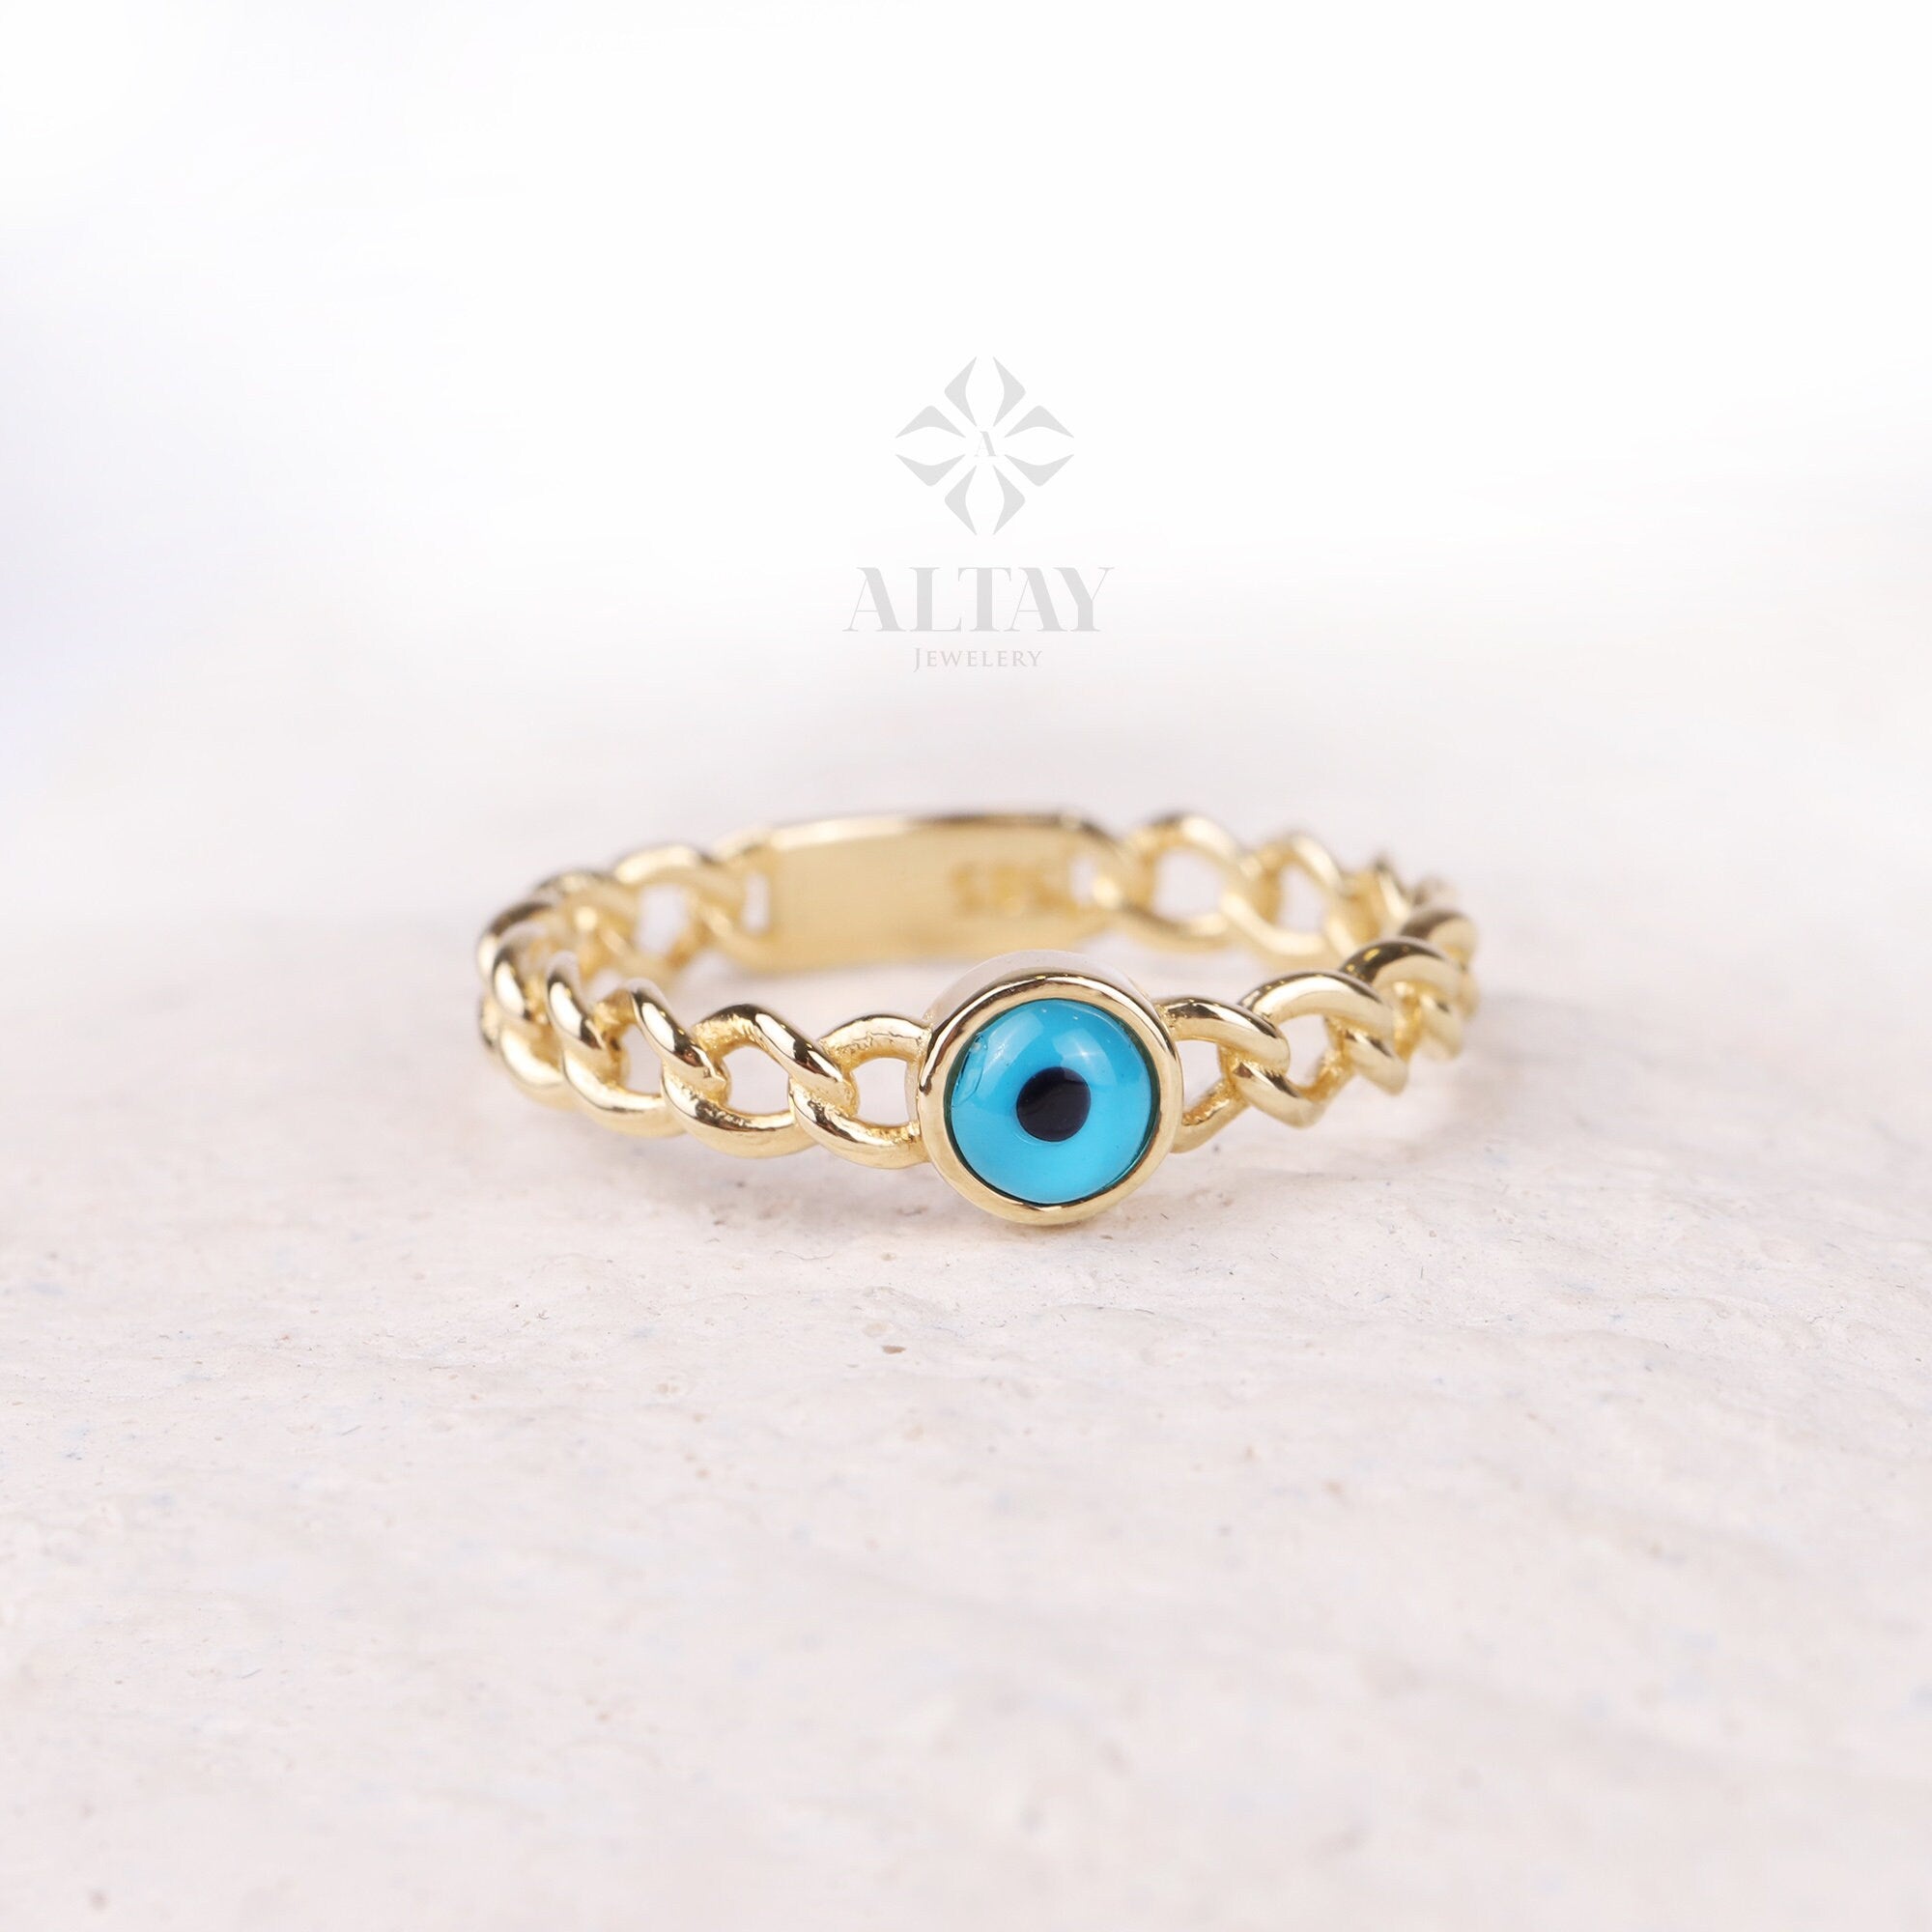 14K Gold Evil Eye Ring, Curb Chain Stacking Ring, Delicate Evil Eye Band, Minimalist Stackable Jewelry, Luck Charm, Protection, Gift for Her